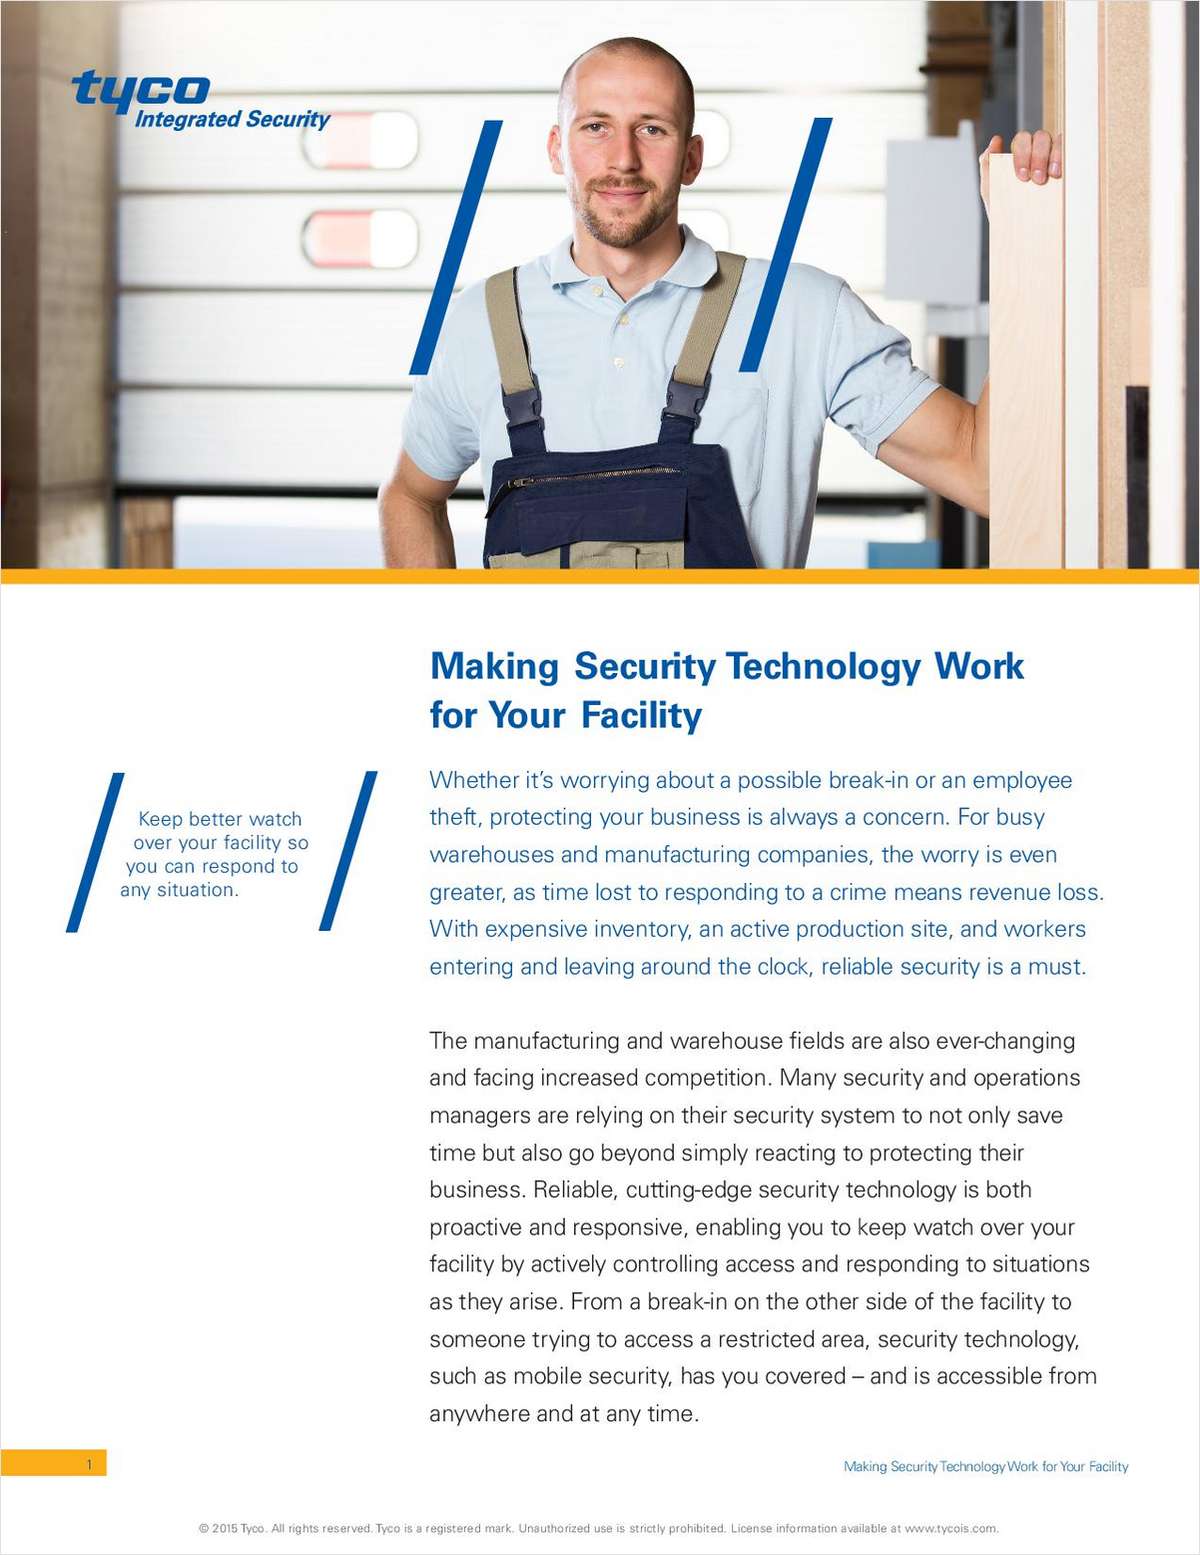 Making Security Technology Work for your Facility